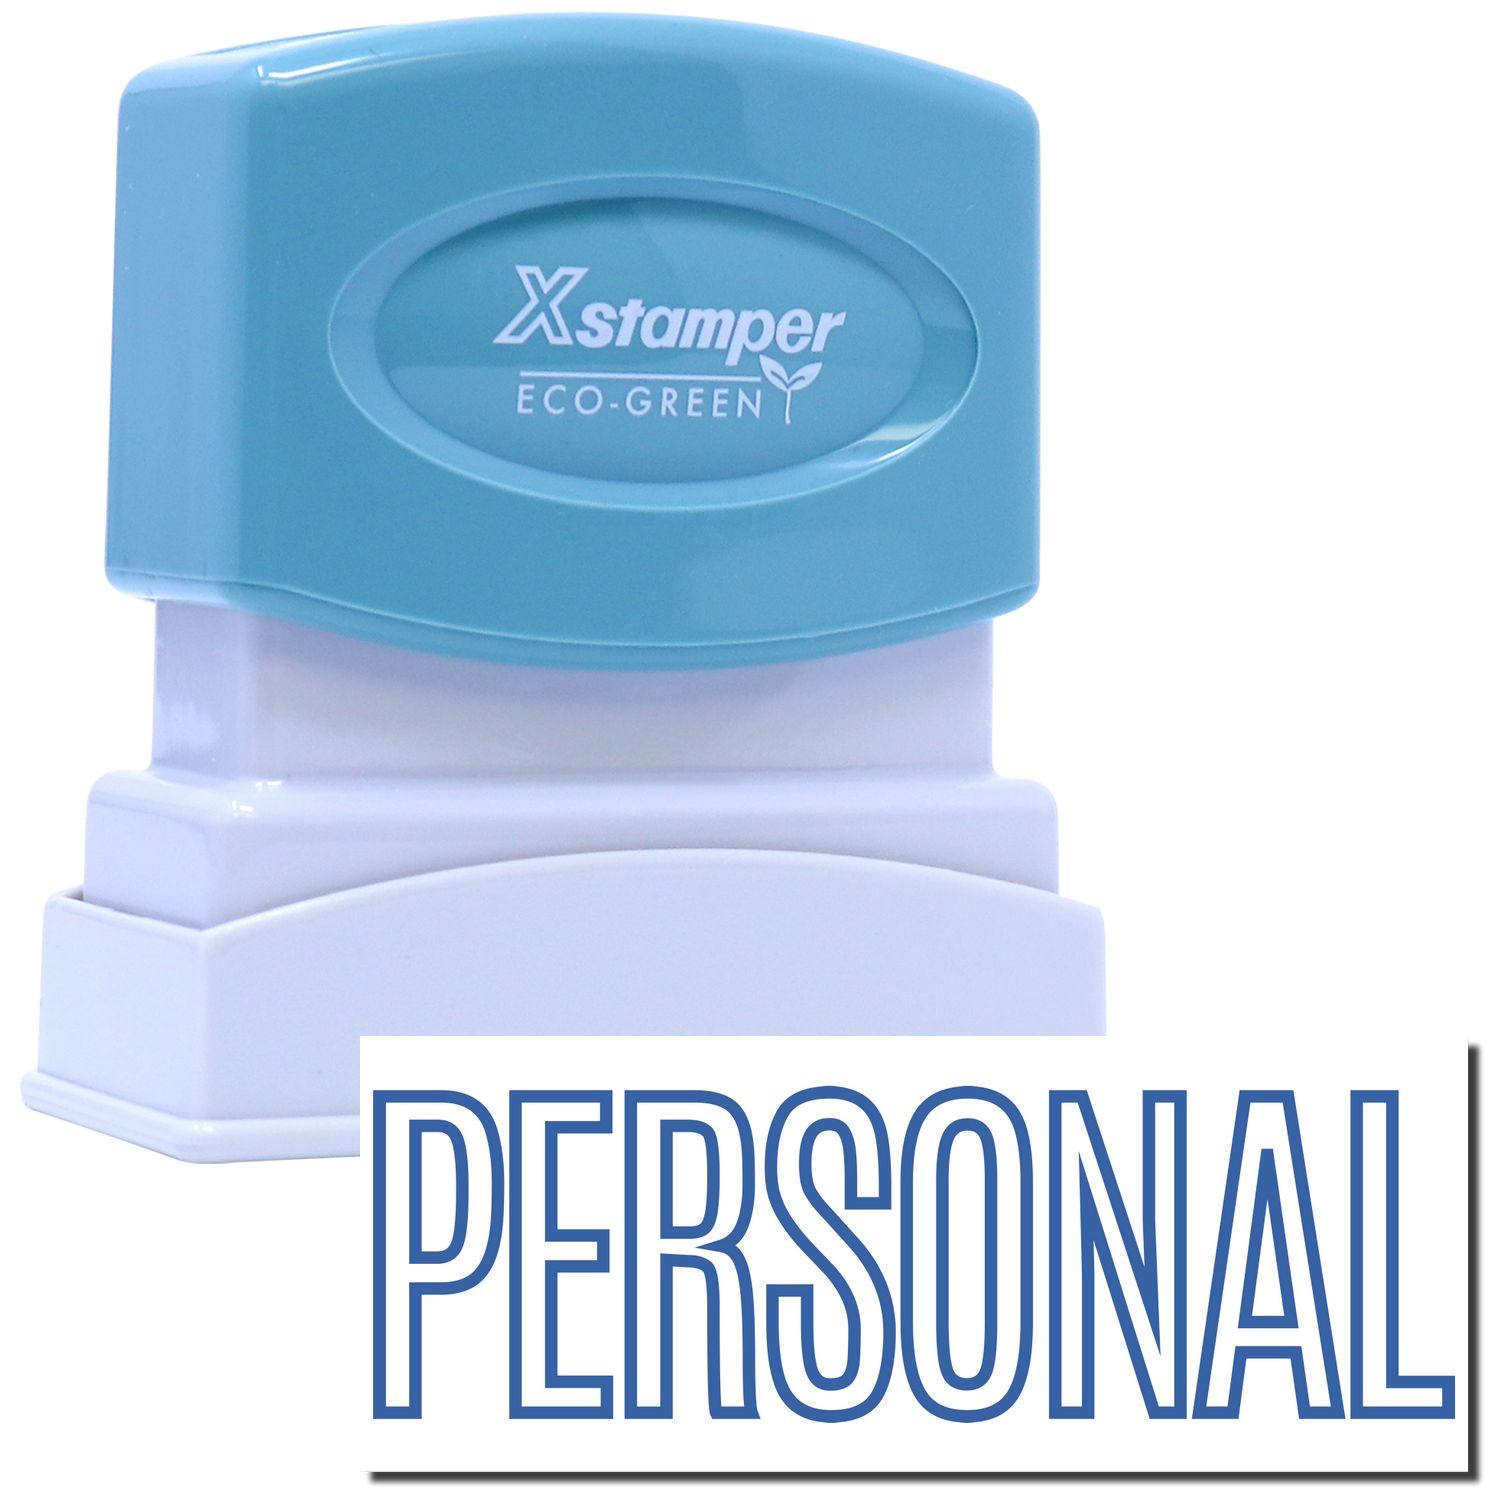 An xstamper stamp with a stamped image showing how the text "PERSONAL" in a blue outline font will display after stamping.